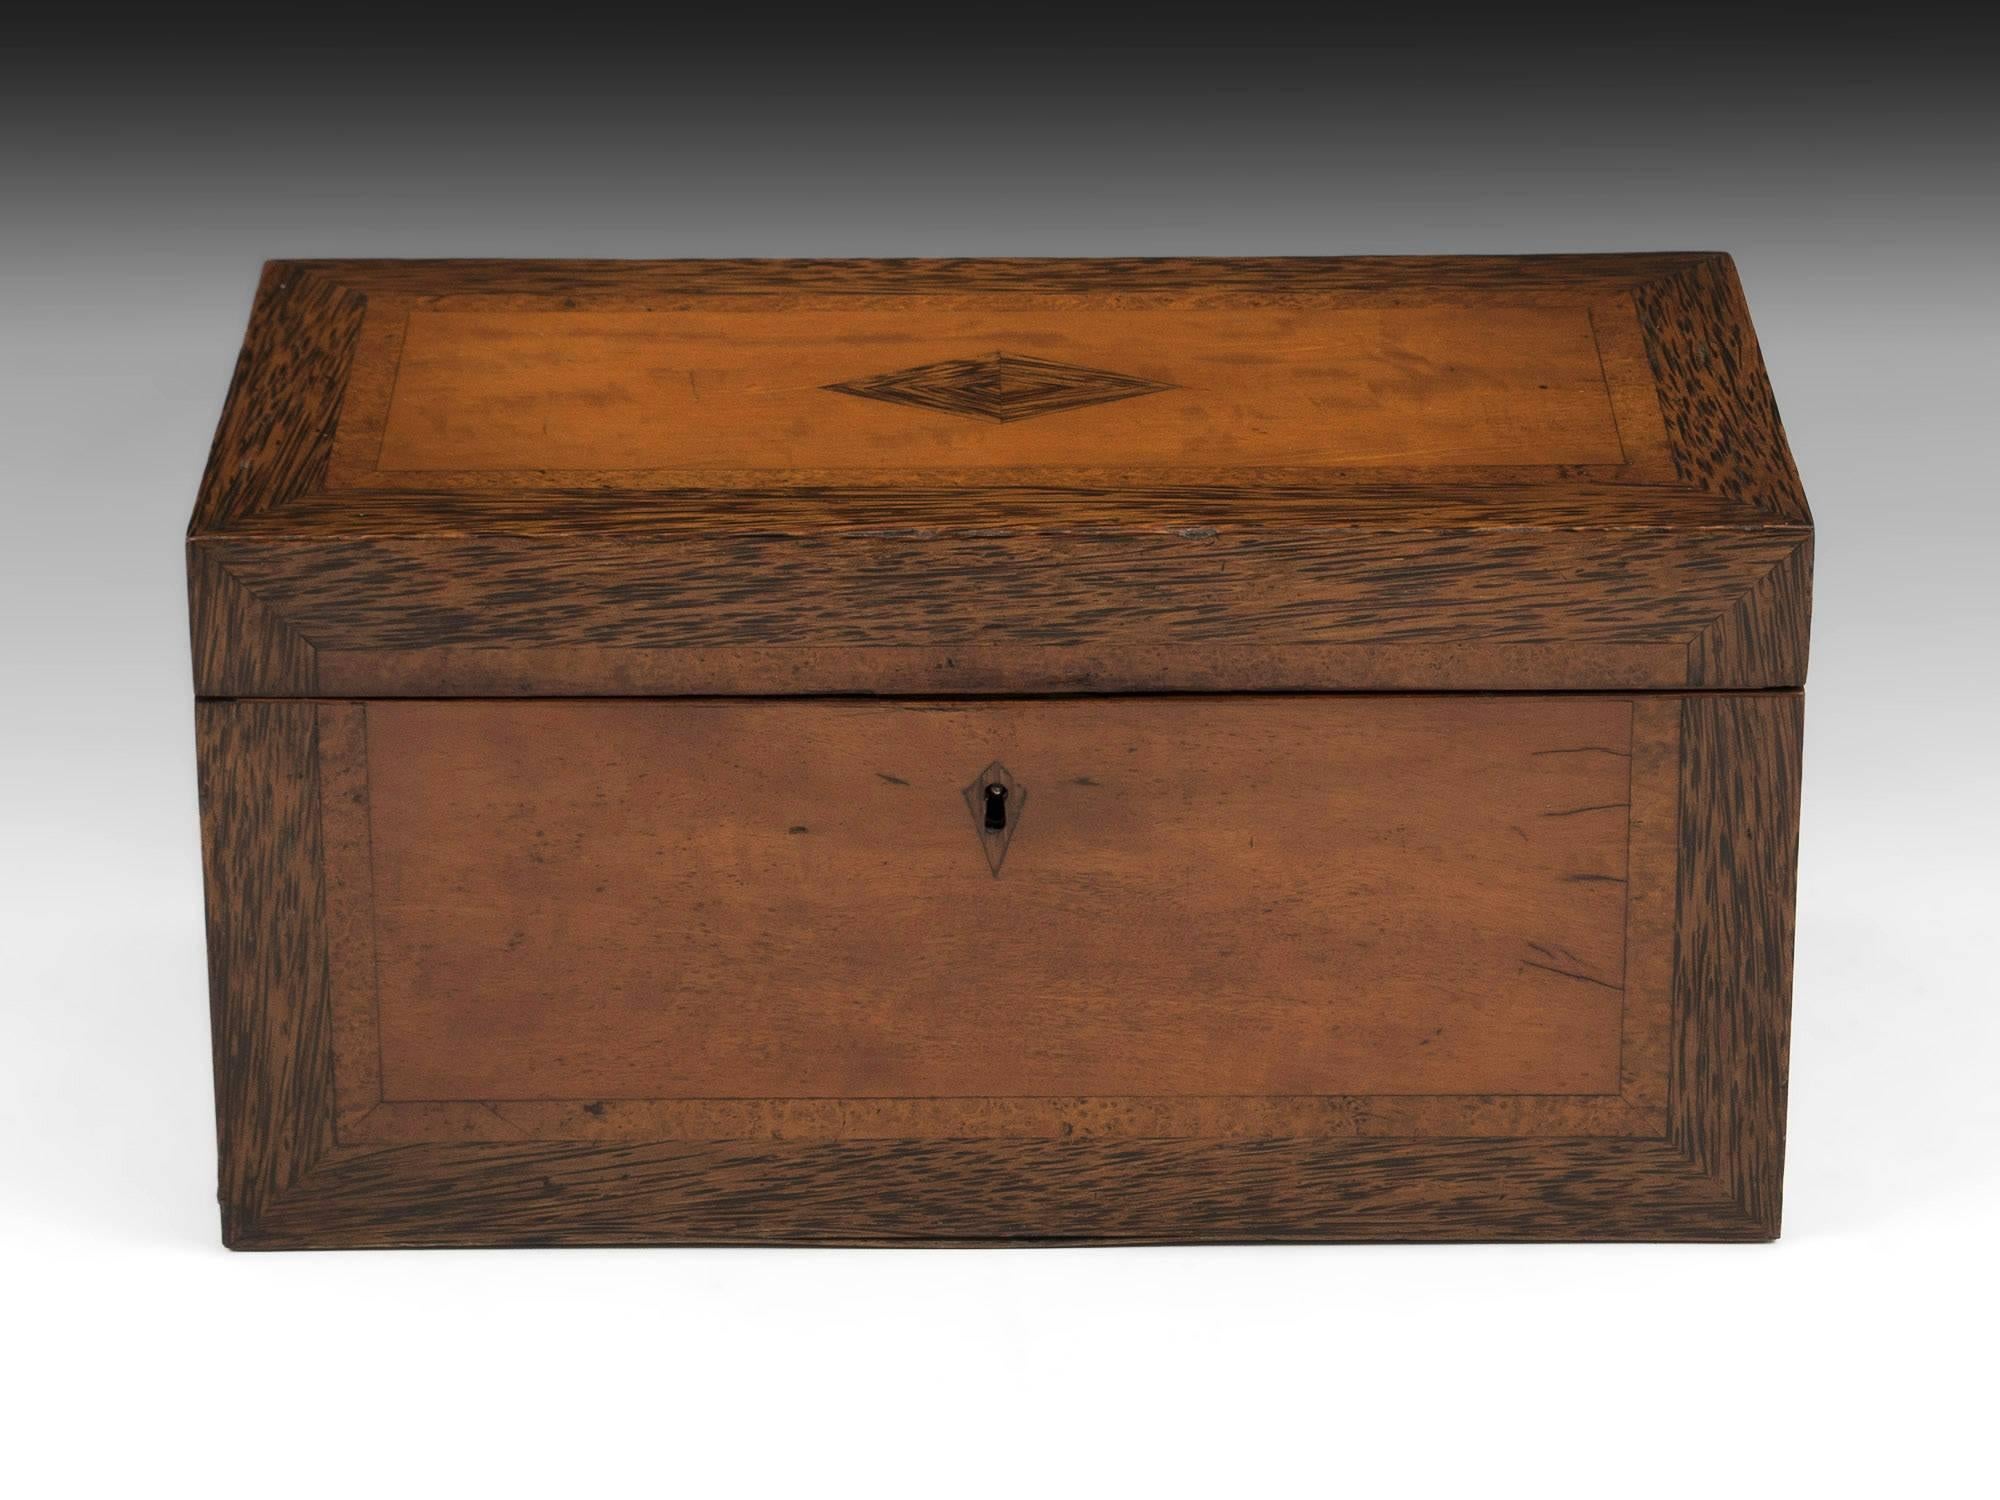 Satinwood tea chest with coconut wood mitred edging on all sides along with a framed amboyna inlay. 

The exotic satinwood tea chest interior features two removable tea caddies with coconut wood edging to match the exterior and each tea caddy is